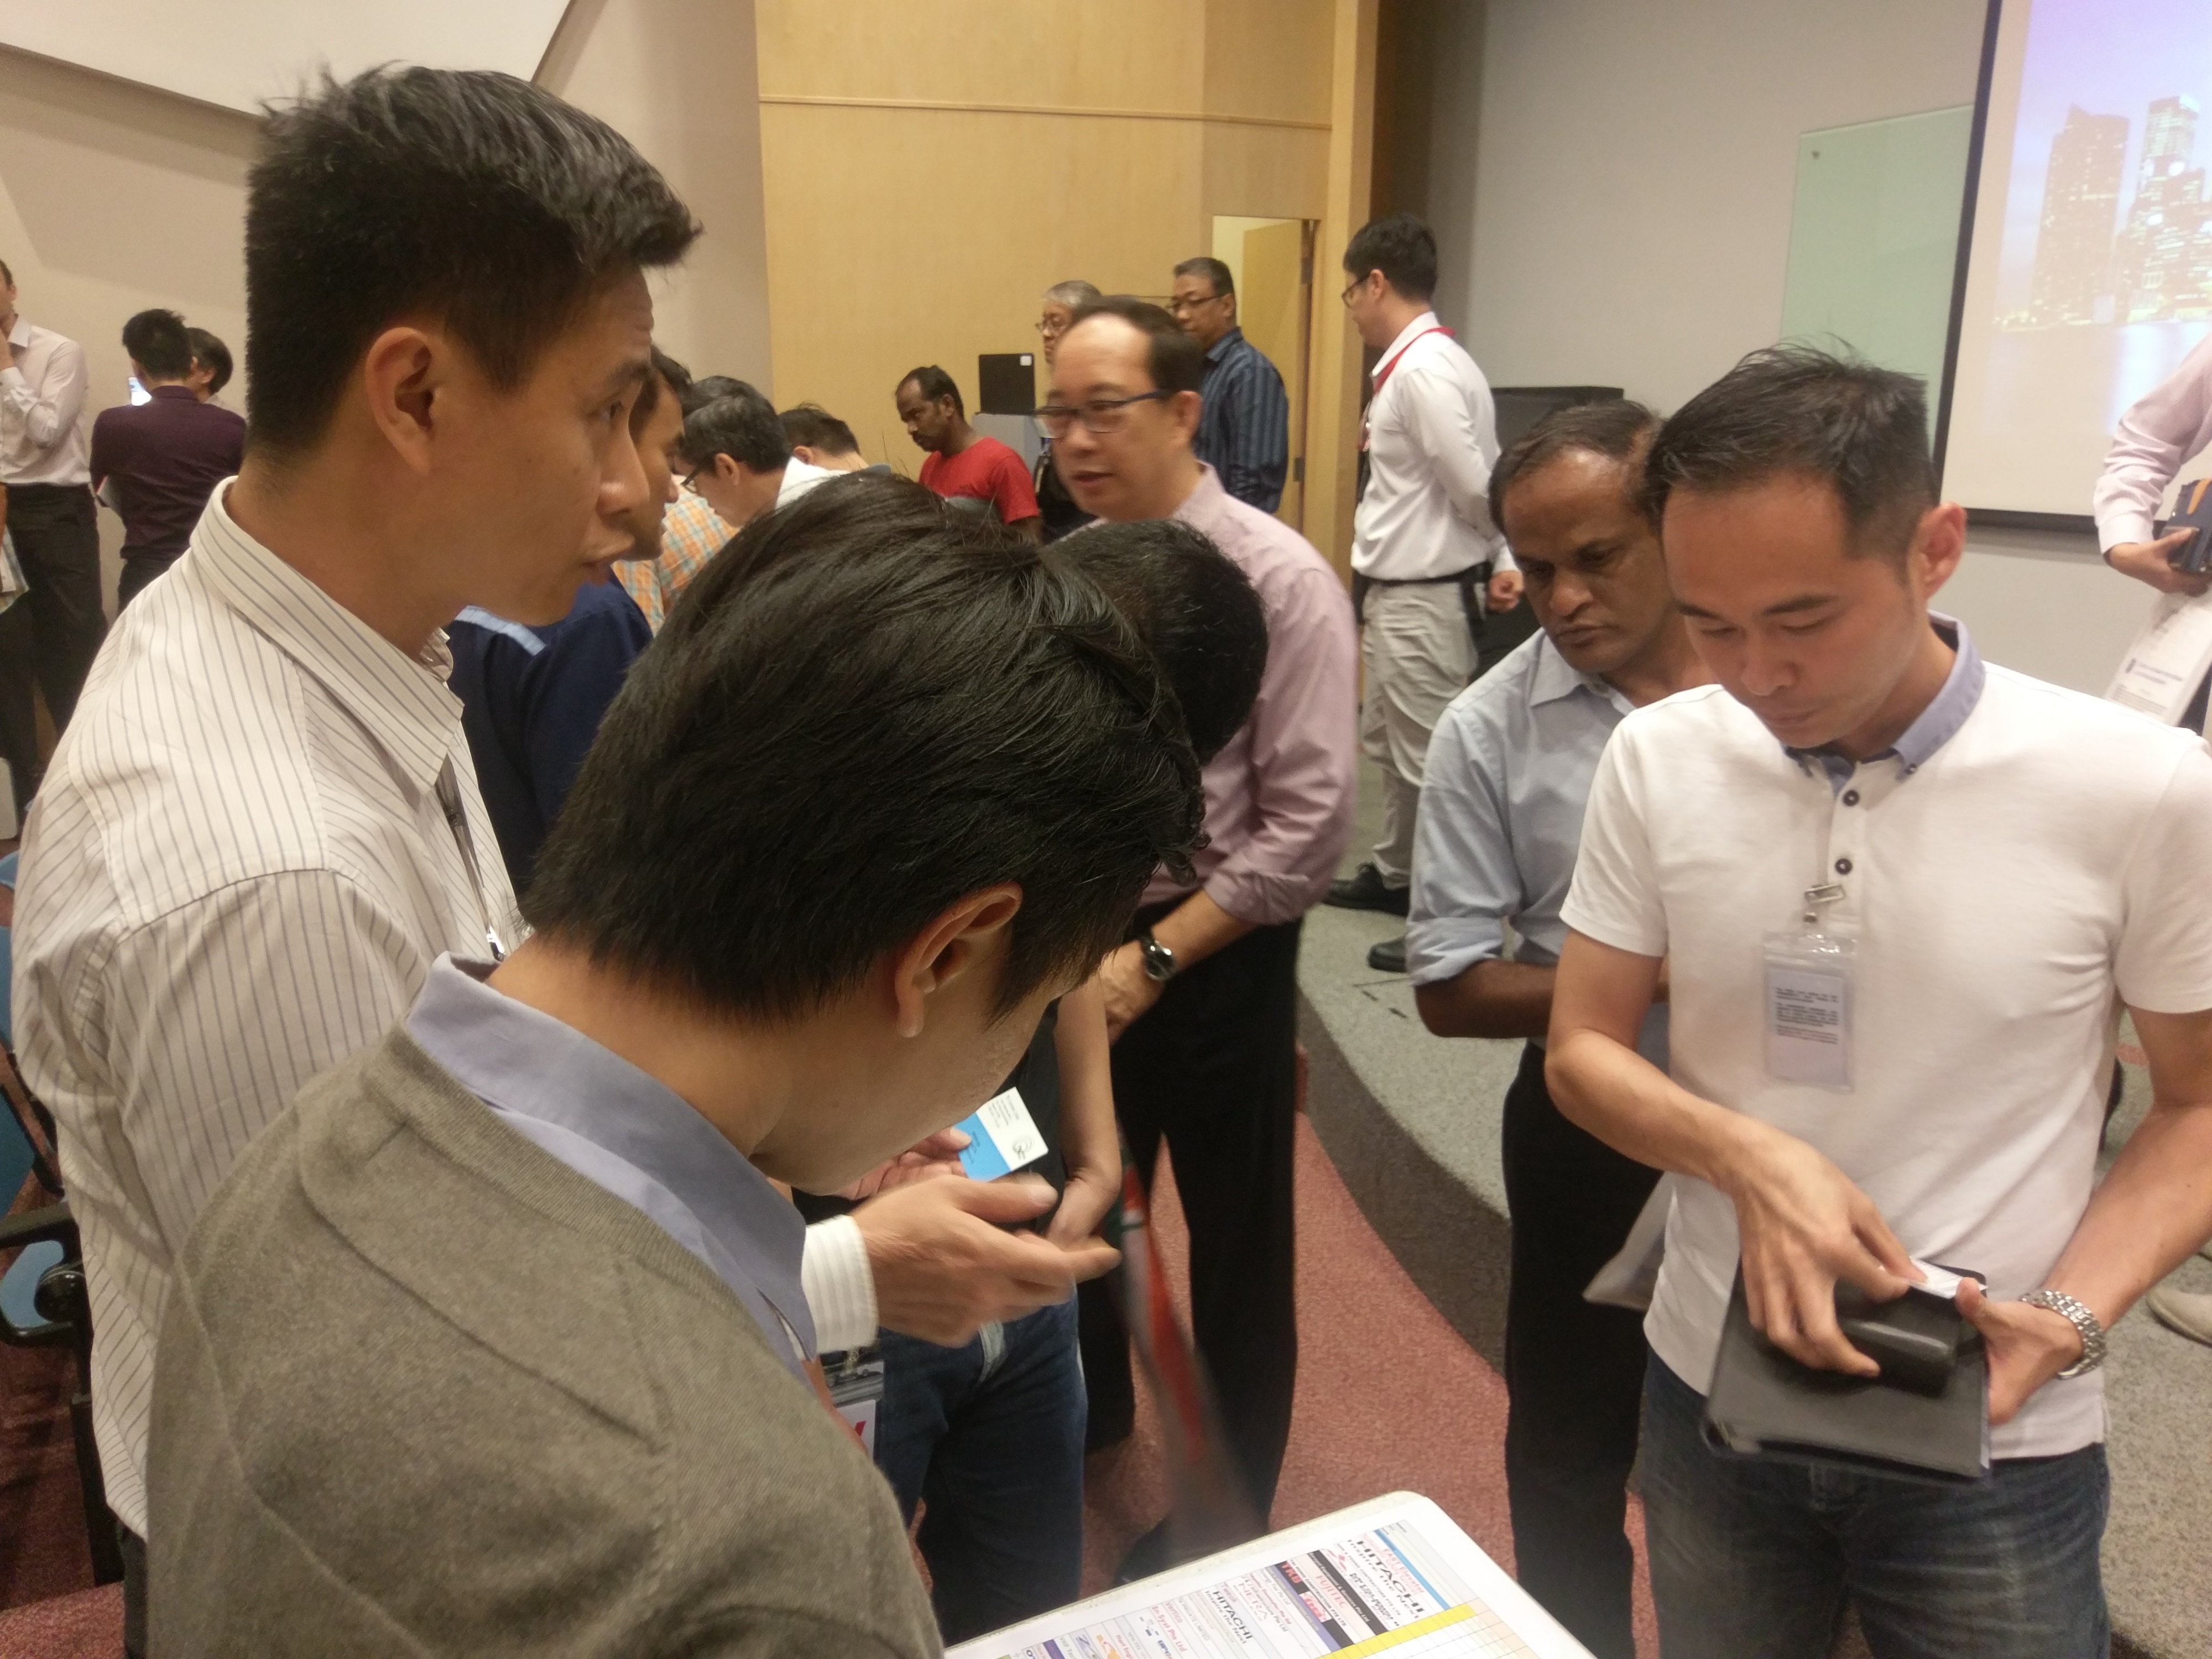 Representatives from DNV GL meeting Singtel sub-contractors to discuss certification opportunities